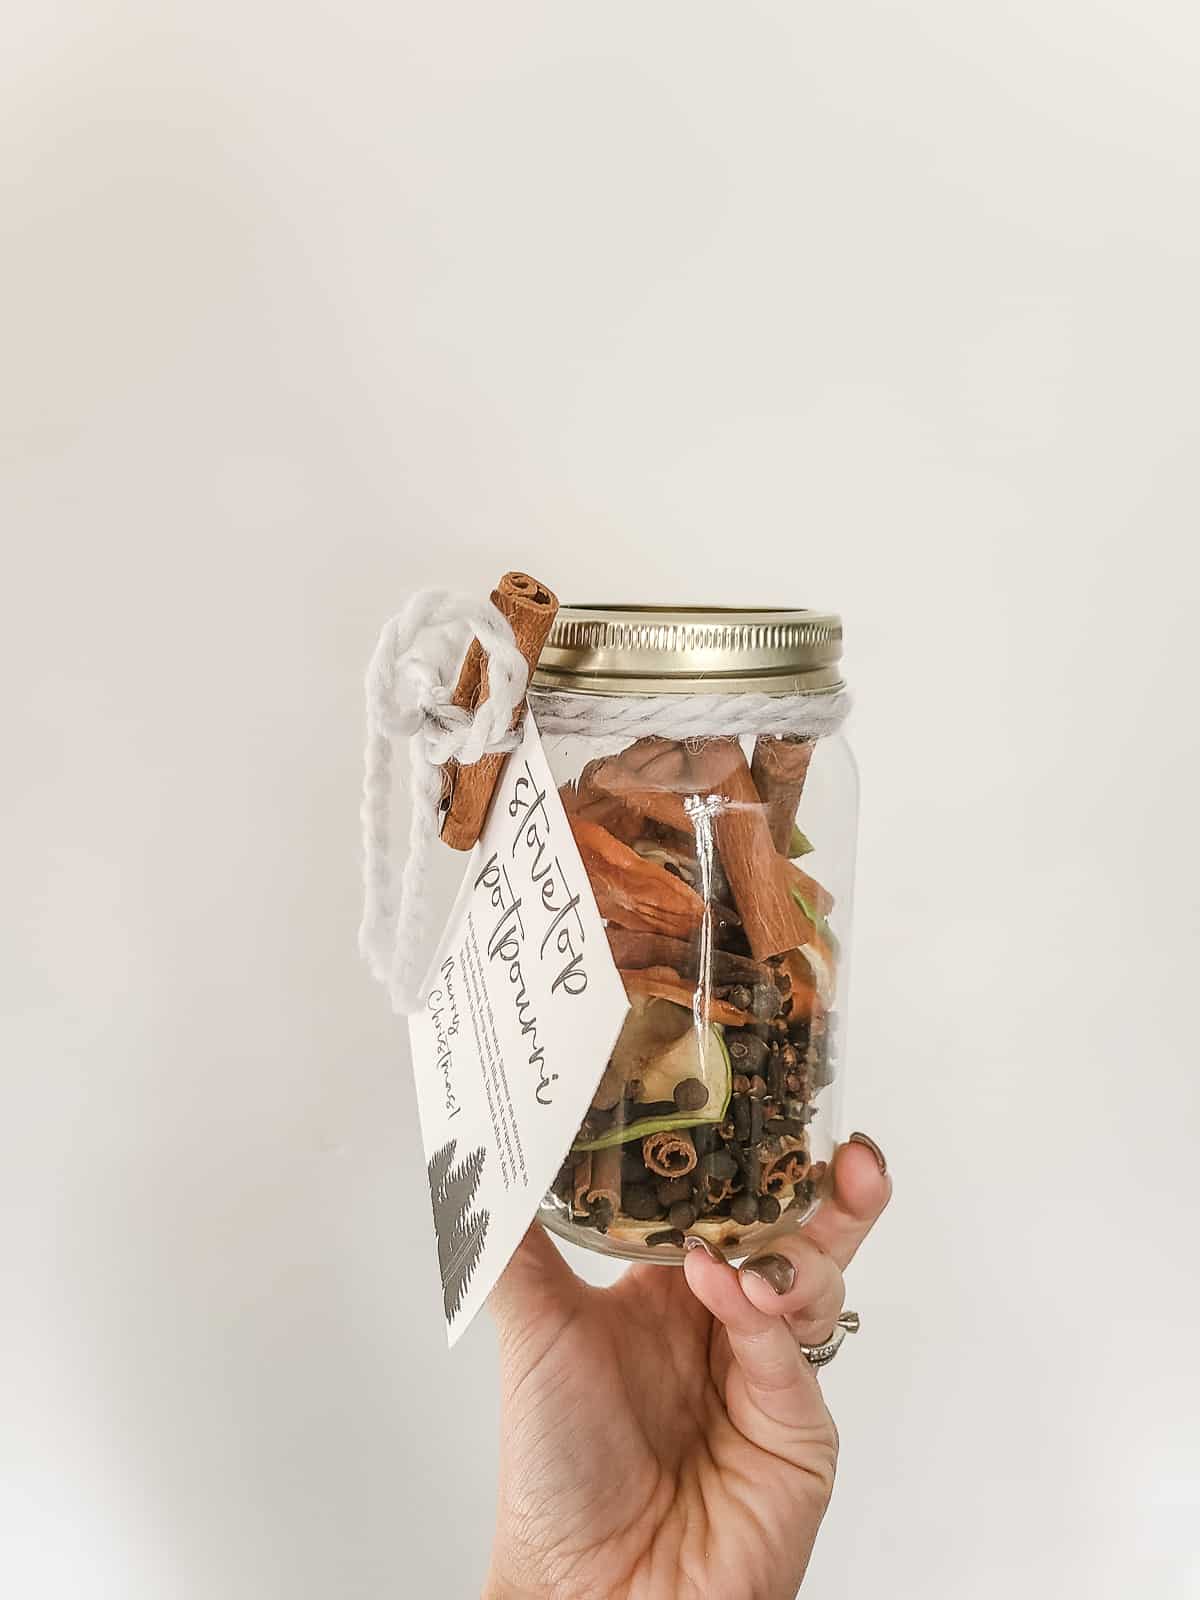 DIY Stove Top Simmer Potpourri: How to Make Your Home Smell Amazing  Naturally - free printable gift tags - Sincerely Saturday